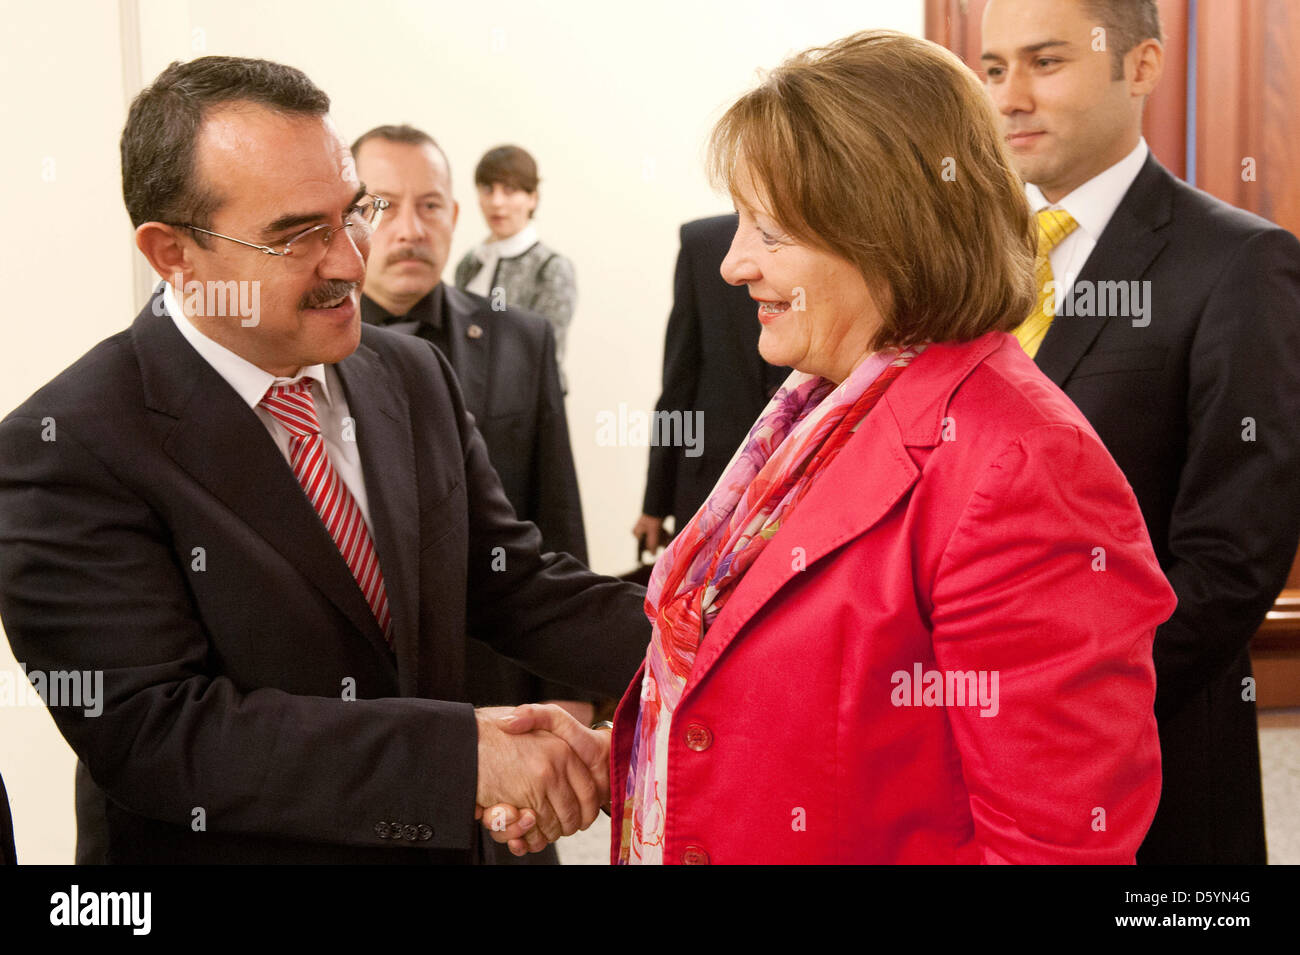 German Justice Minister Sabine Leutheusser-Schnarrenberger meets Turkish counterpart Sadullah Ergin in Ankara, Turkey, 31 October 2012. The German minister is on a four-day visit to Turkey. Photo: MAURIZIO GAMBARINI Stock Photo